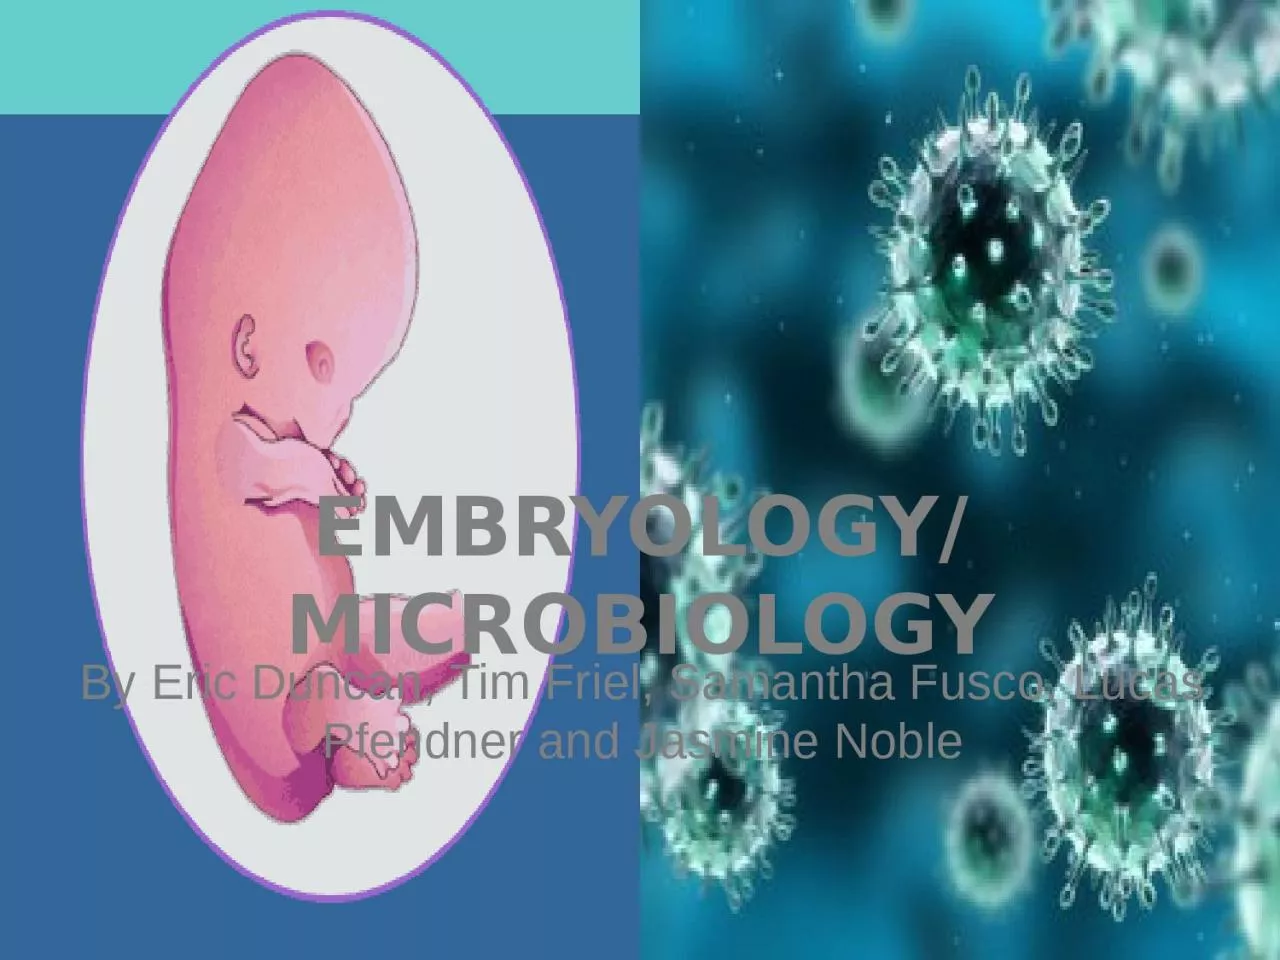 Embryology/Microbiology By Eric Duncan, Tim Friel, Samantha Fusco, Lucas Pfendner and